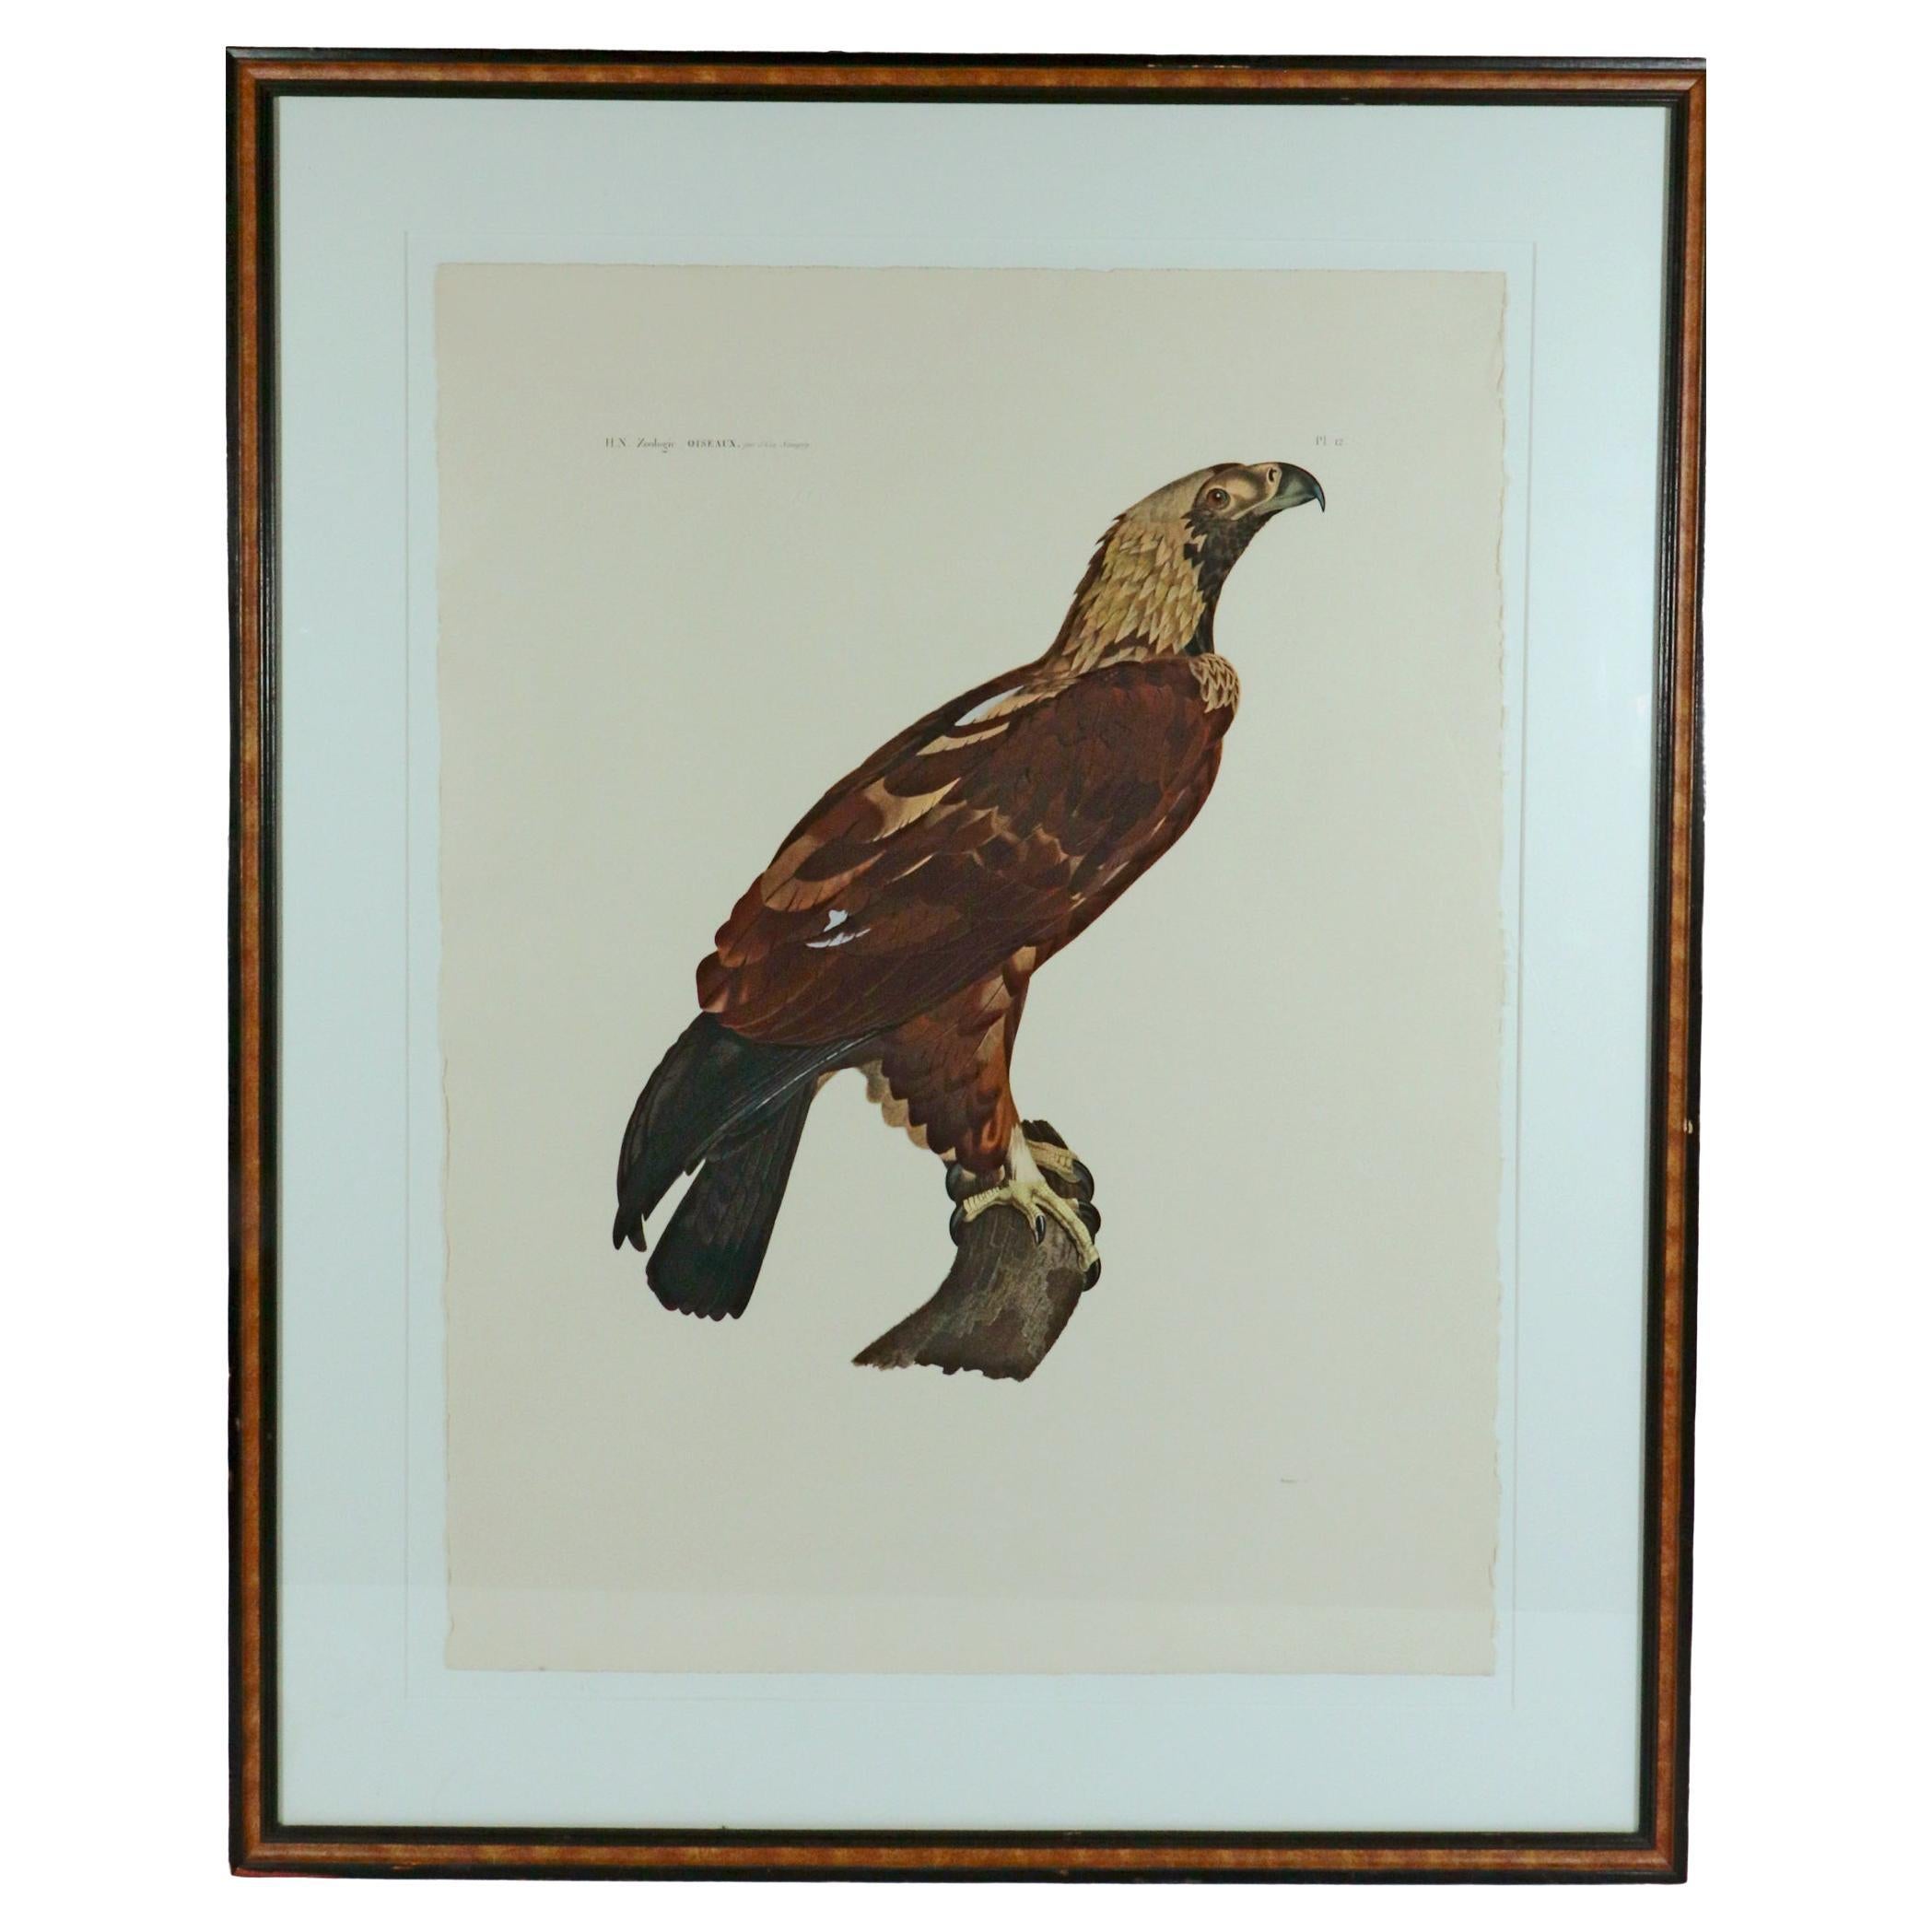 French Engraving of the Eastern Imperial Eagle from the Description de l'Egypte. 
J. Ces. Savigny,
1809-1813.

The large stipple engraving depicts the Imperial Eagle ~ This is Aquila heliaca or the Eastern Imperial Eagle. It is the species whose